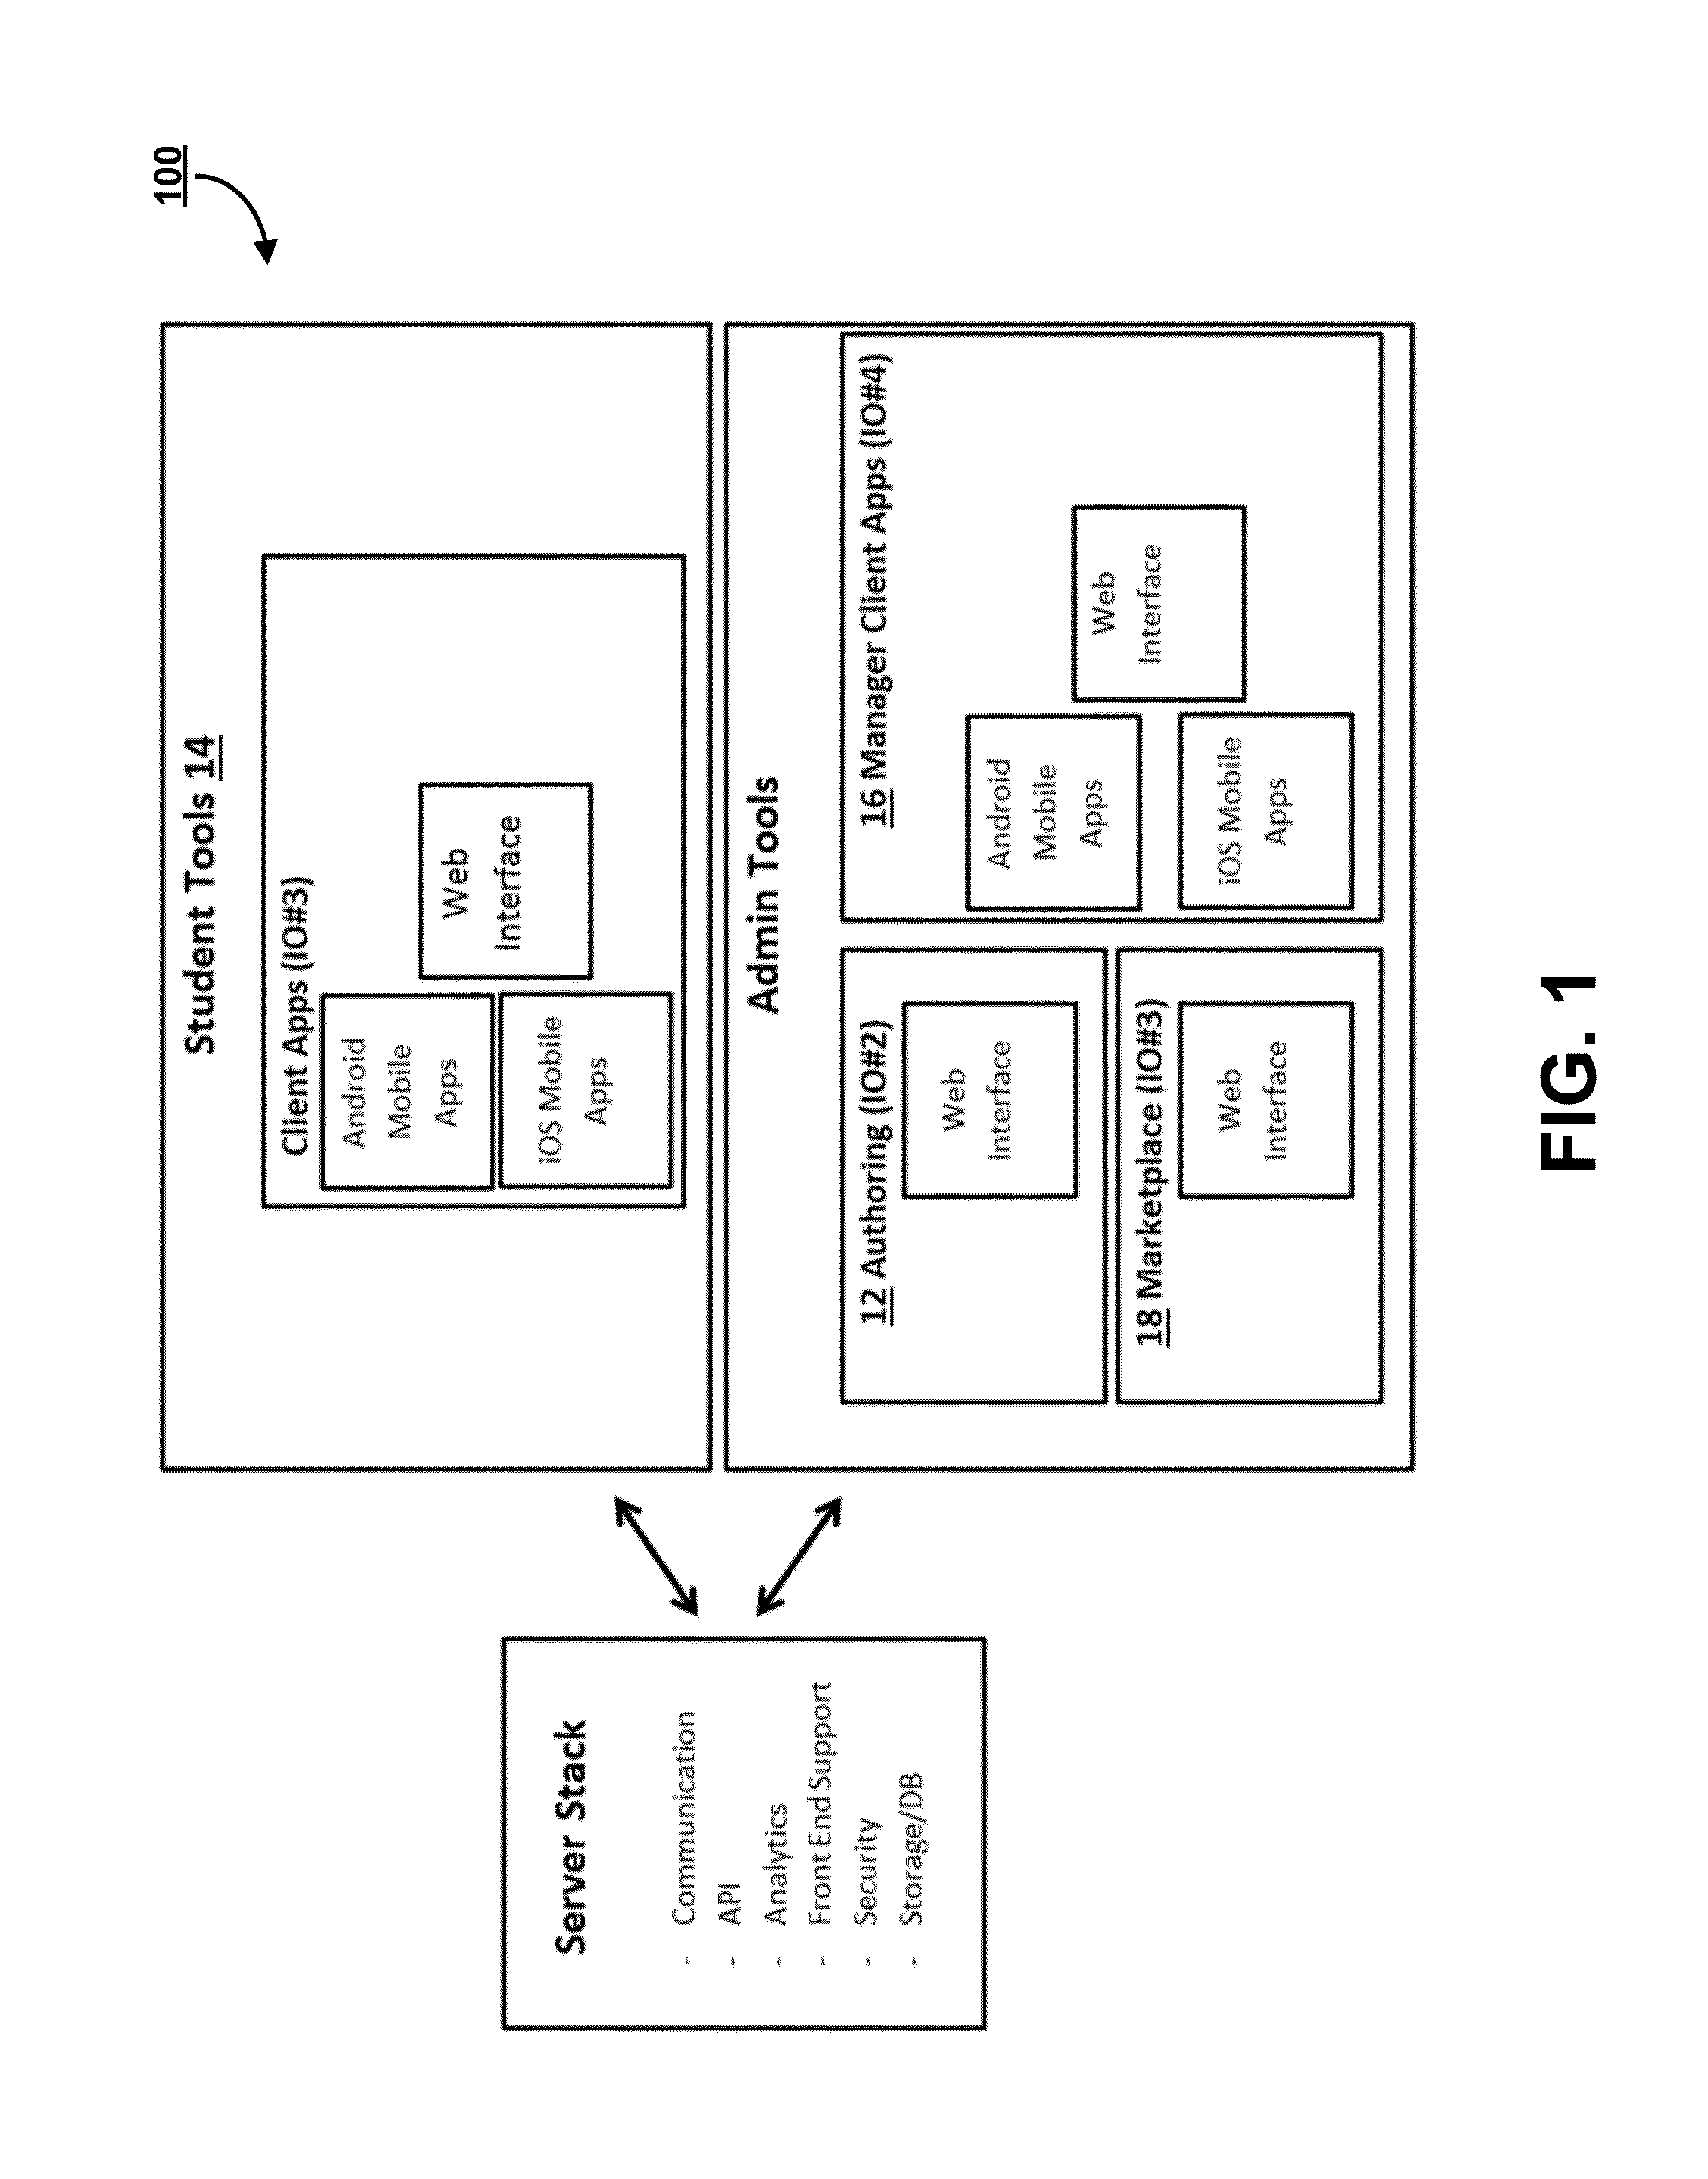 System and method for integrated learning